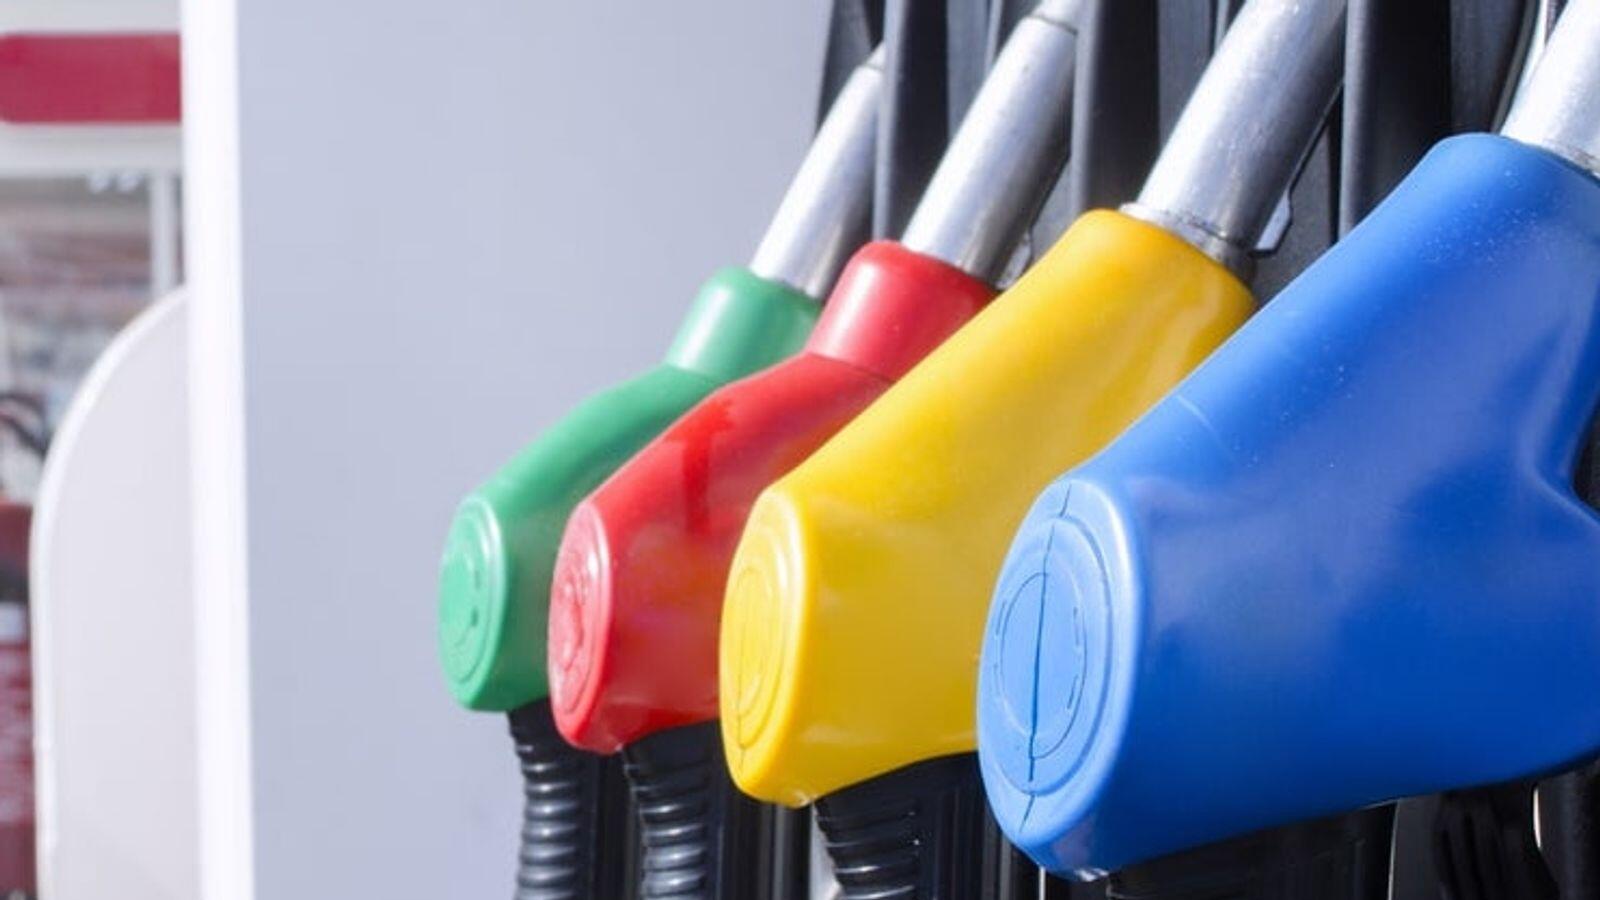 UAE slashes petrol prices for June, lowest in four months - News